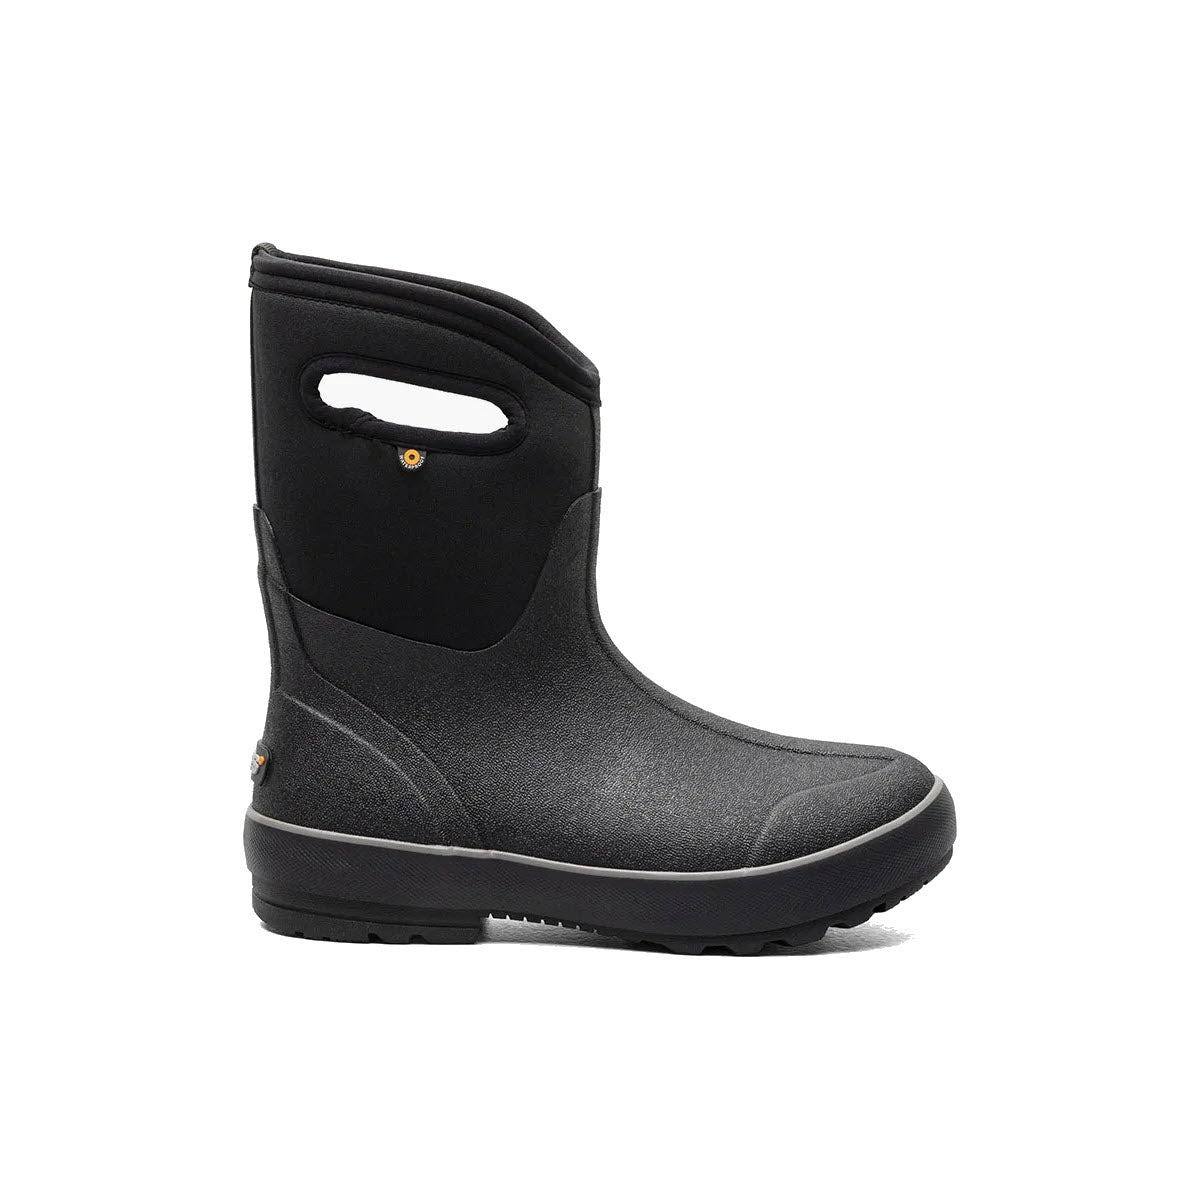 Eco-friendly Bogs Classic II Mid Black winter boot with handle on white background.